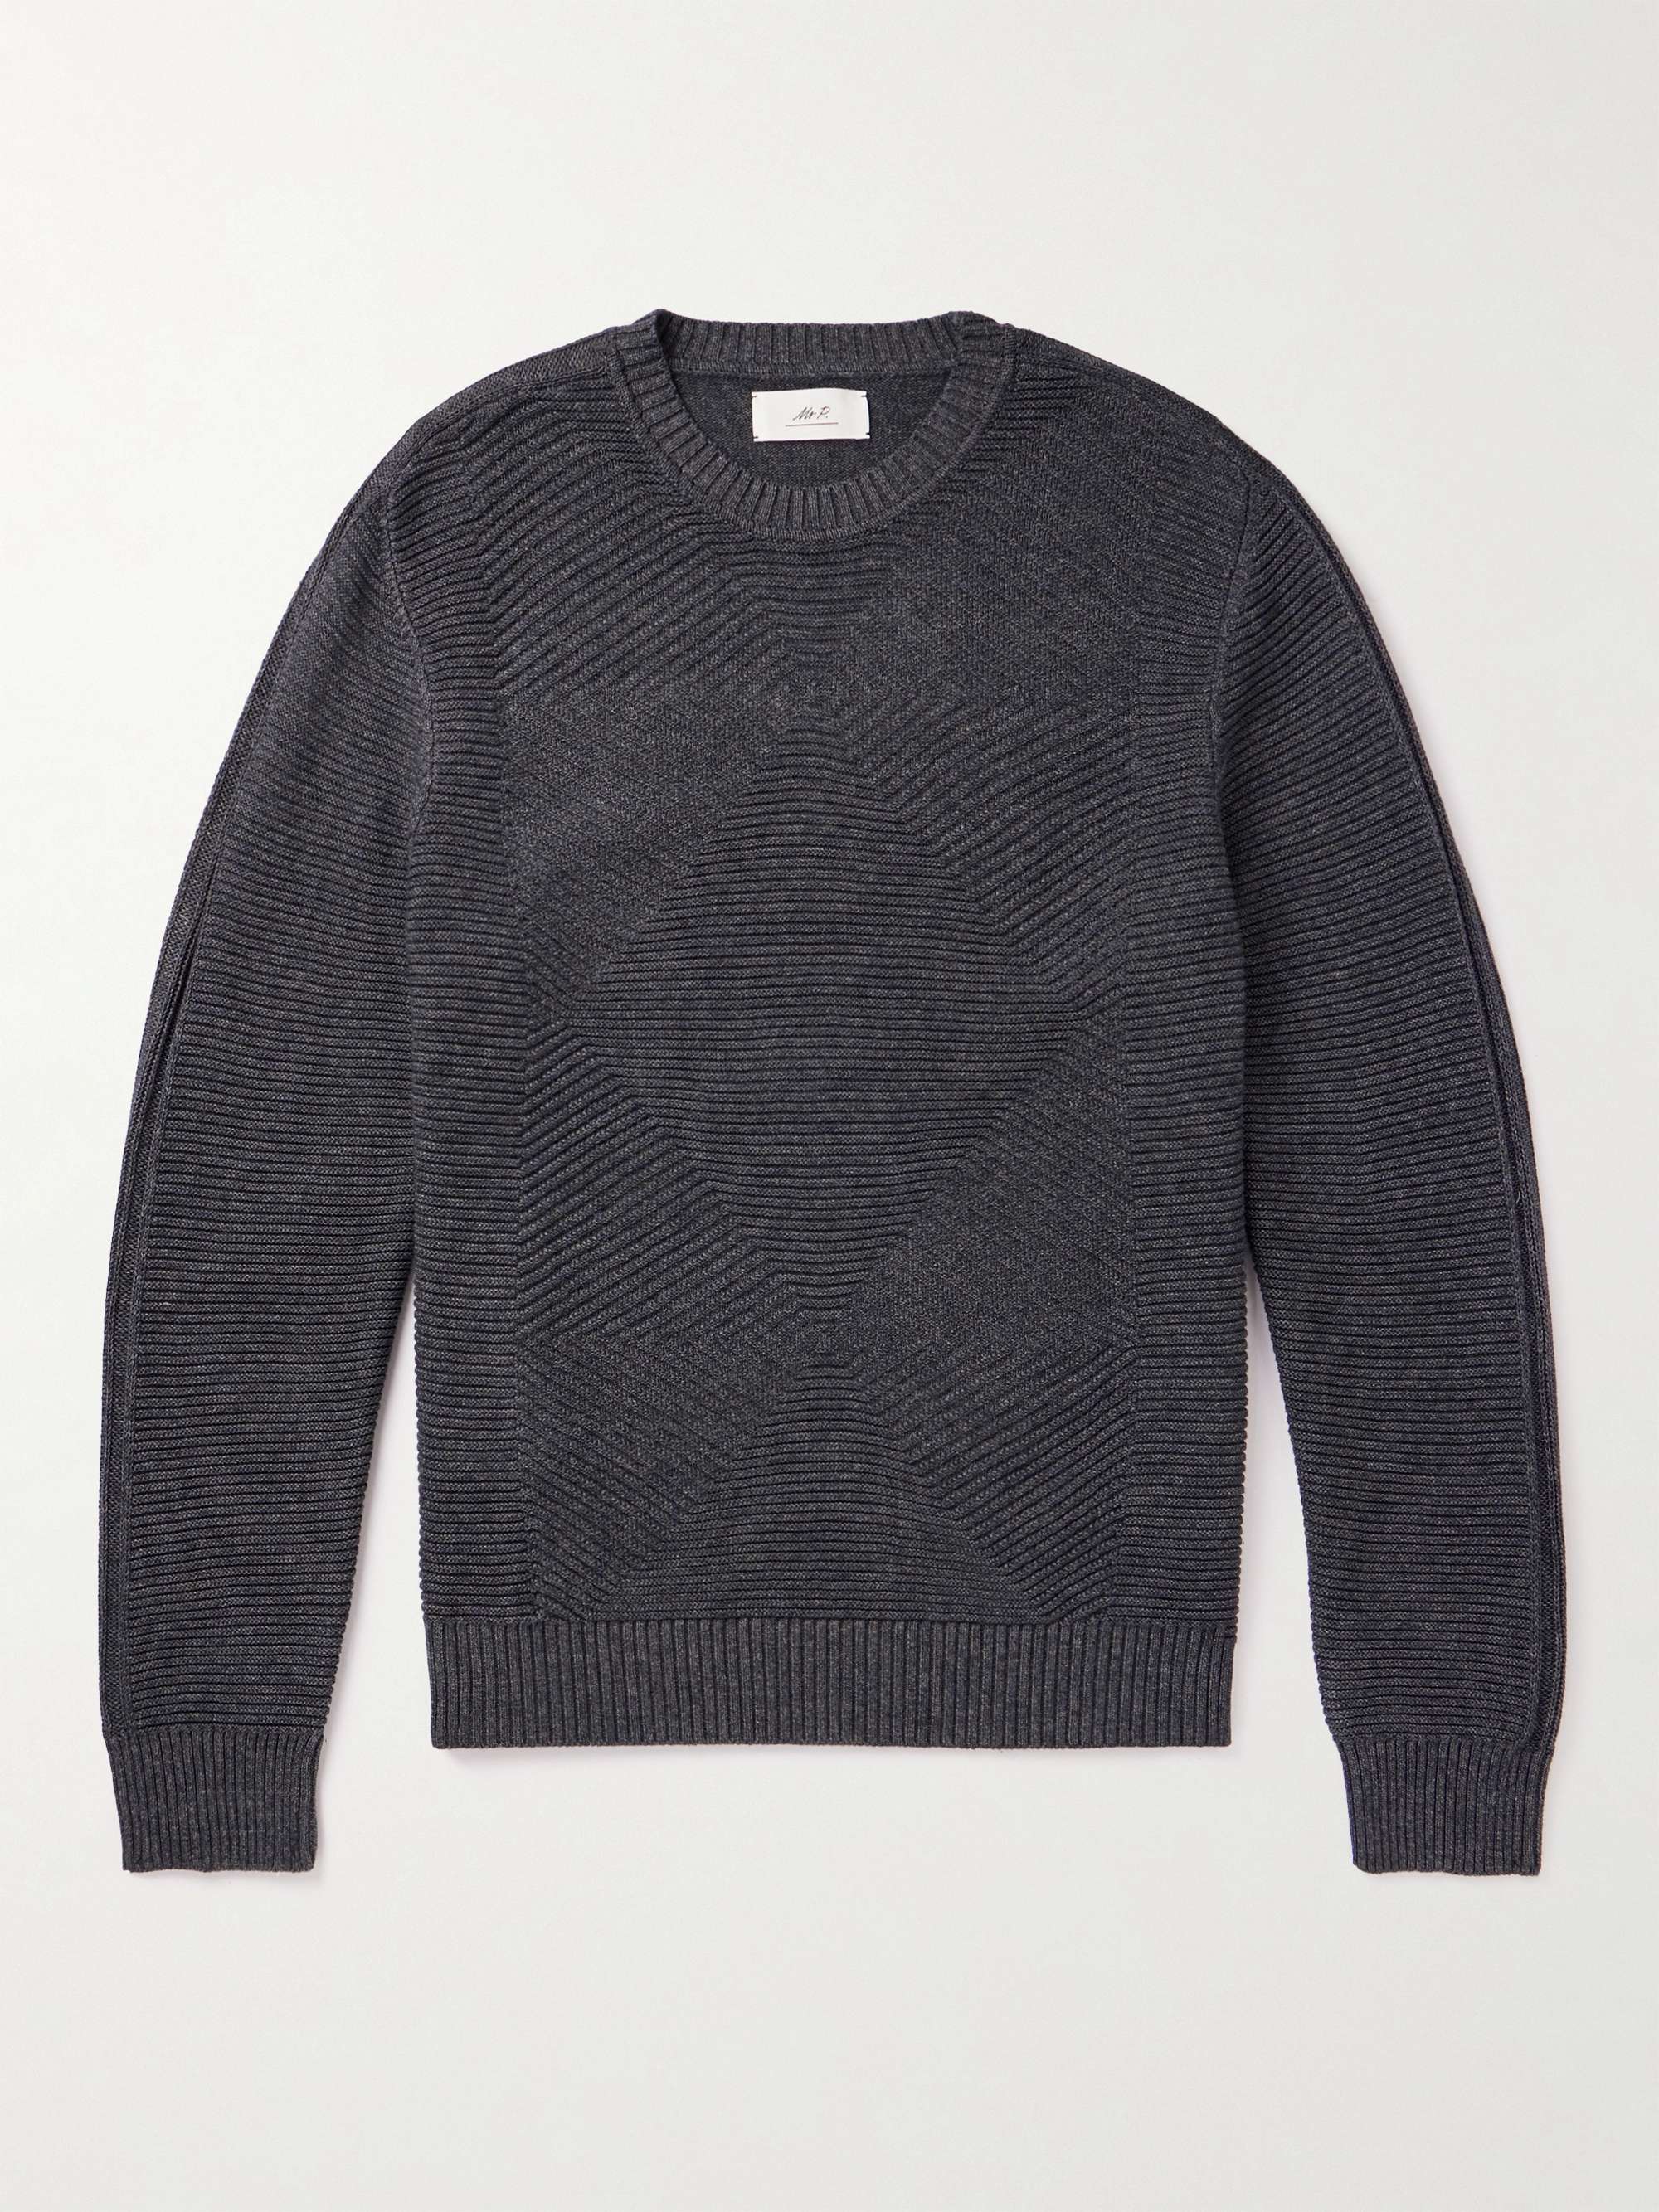 MR P. Ribbed Cotton Sweater